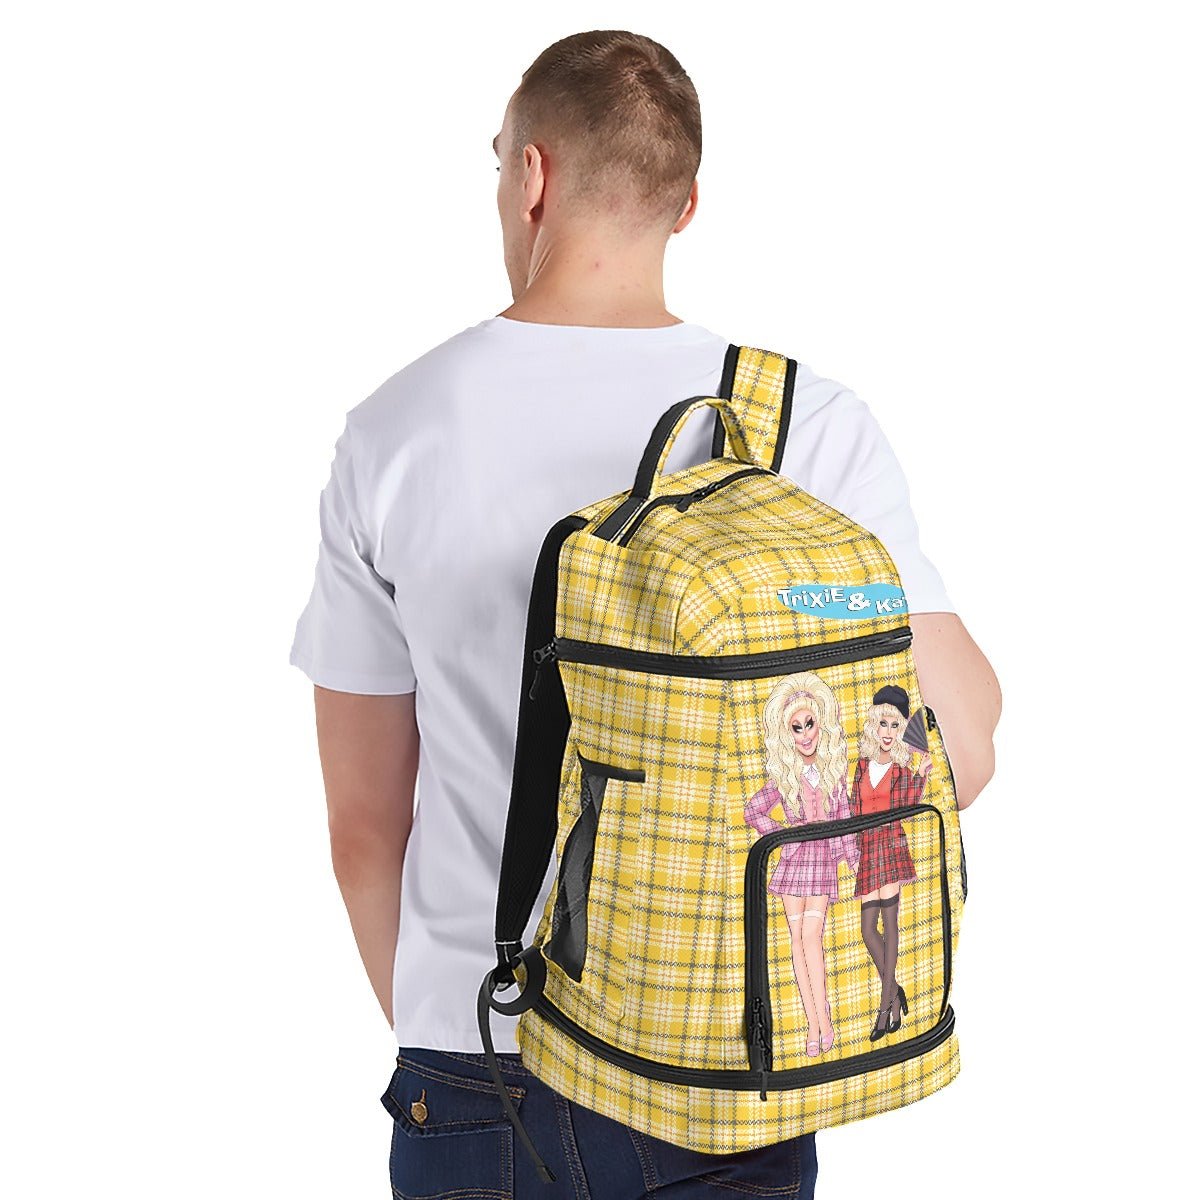 Trixie Katya - Clueless Large Backpack - dragqueenmerch